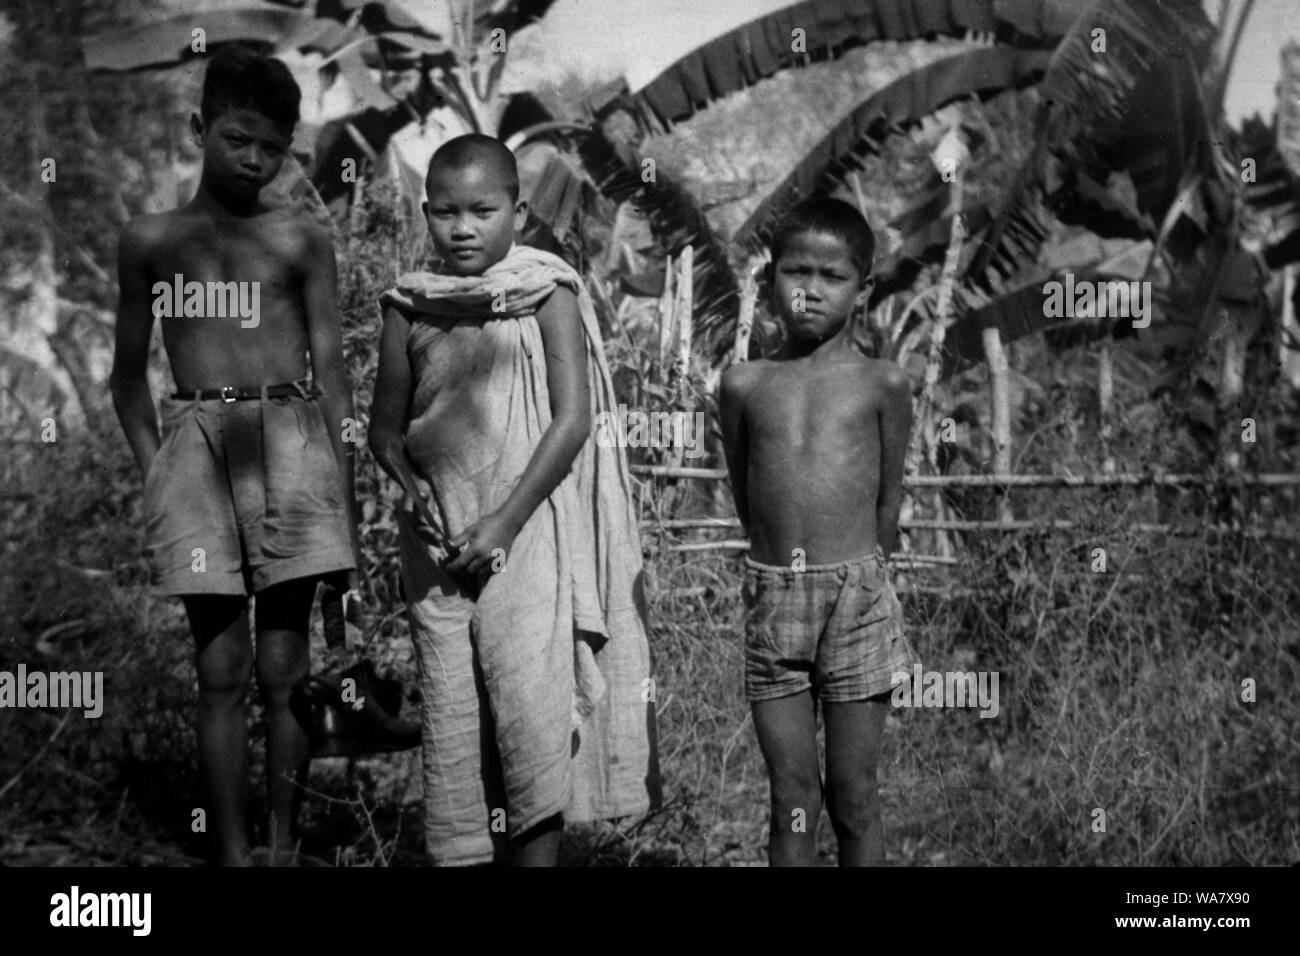 AJAXNETPHOTO. 1953-1957 (APPROX). INDO CHINA. VIETNAM. (IN-COUNTRY LOCATION UNKNOWN.) -  THREE YOUNG BOYS, ONE (CENTRE) WITH SHAVED HEAD WEARING BUDDHIST ROBE, IN A PLANTATION LANDSCAPE. PHOTO:JEAN CORRE/AJAXREF:RX7 191508 240 Stock Photo